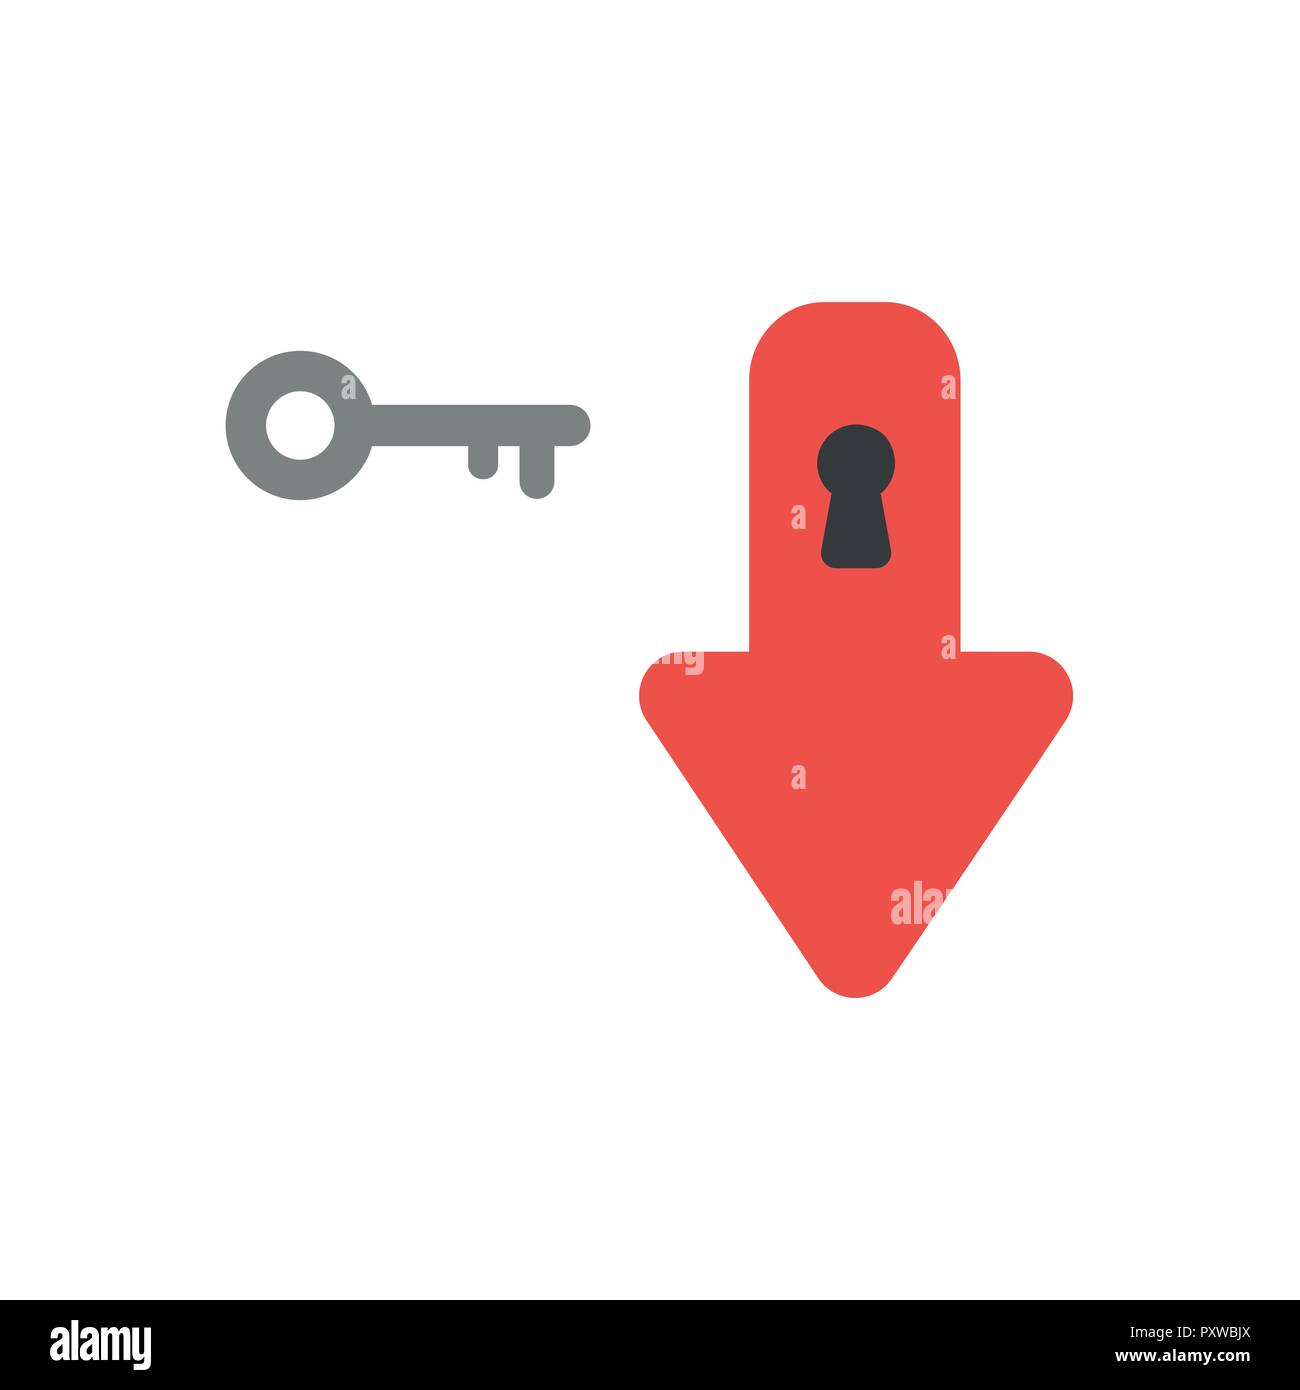 Vector illustration icon concept of arrow moving down with keyhole and key. Stock Vector